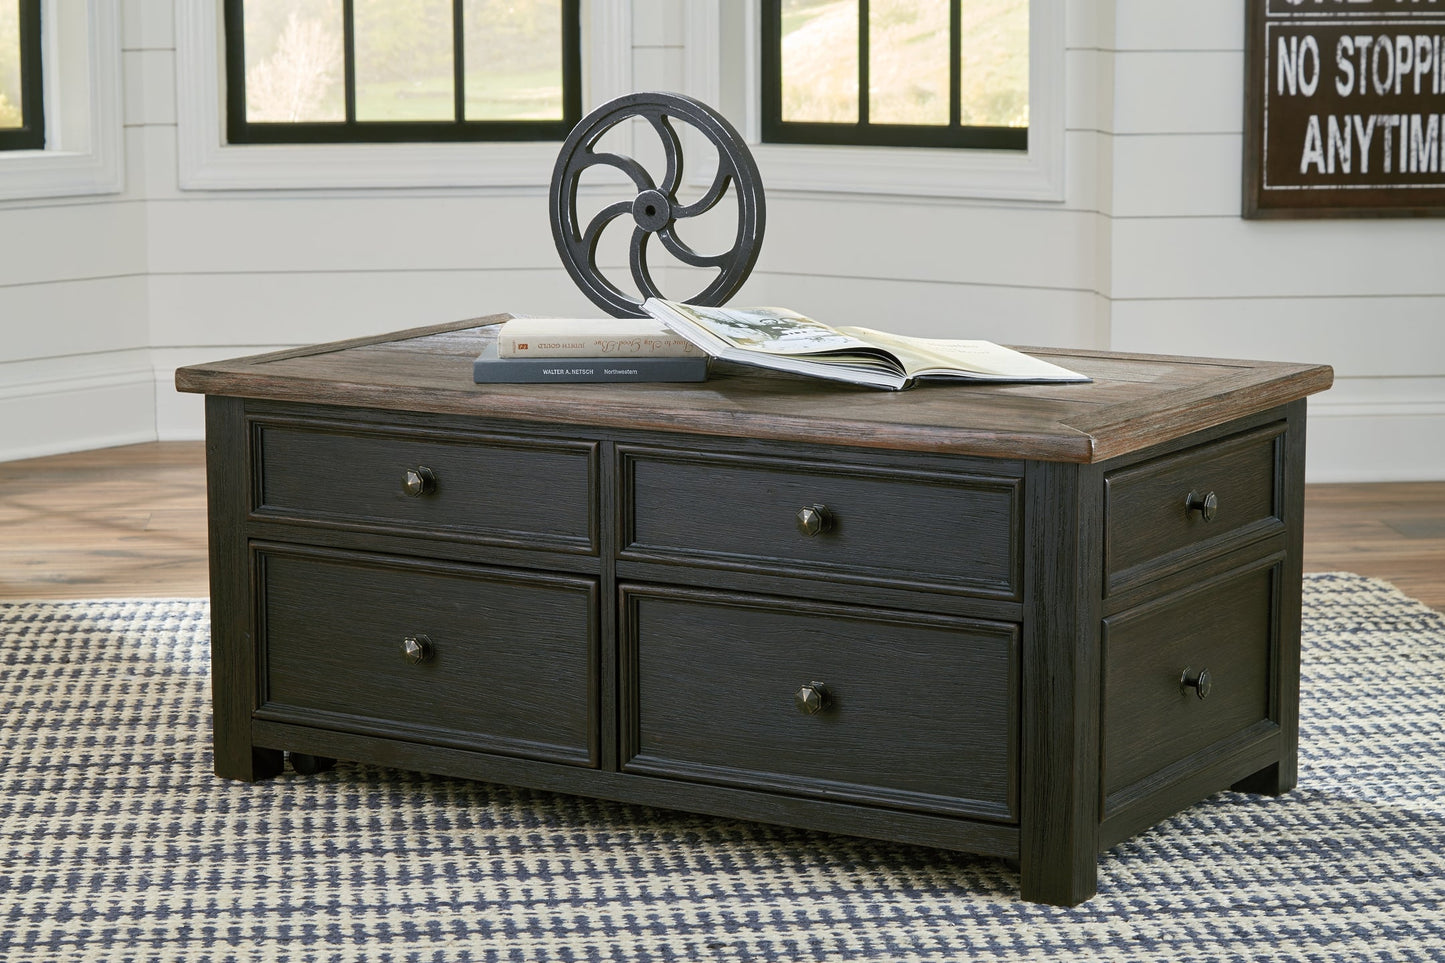 Tyler Creek Coffee Table with 1 End Table Rent Wise Rent To Own Jacksonville, Florida